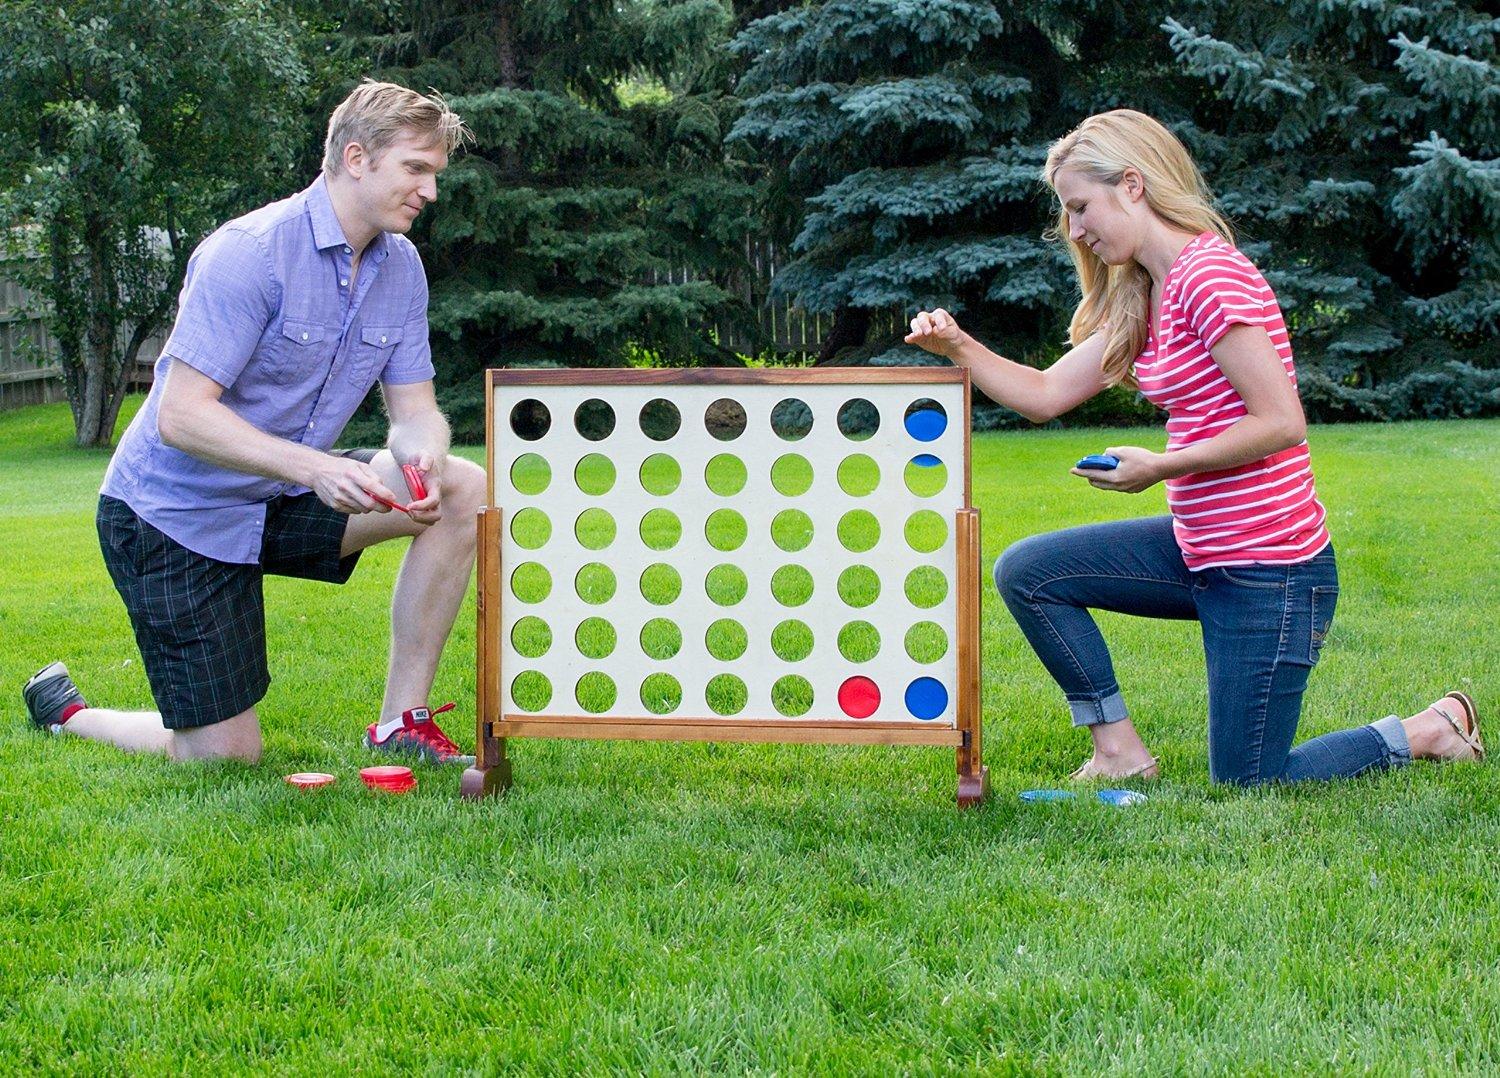 Giant Connect 4 Outdoor Game Rental Denver Co